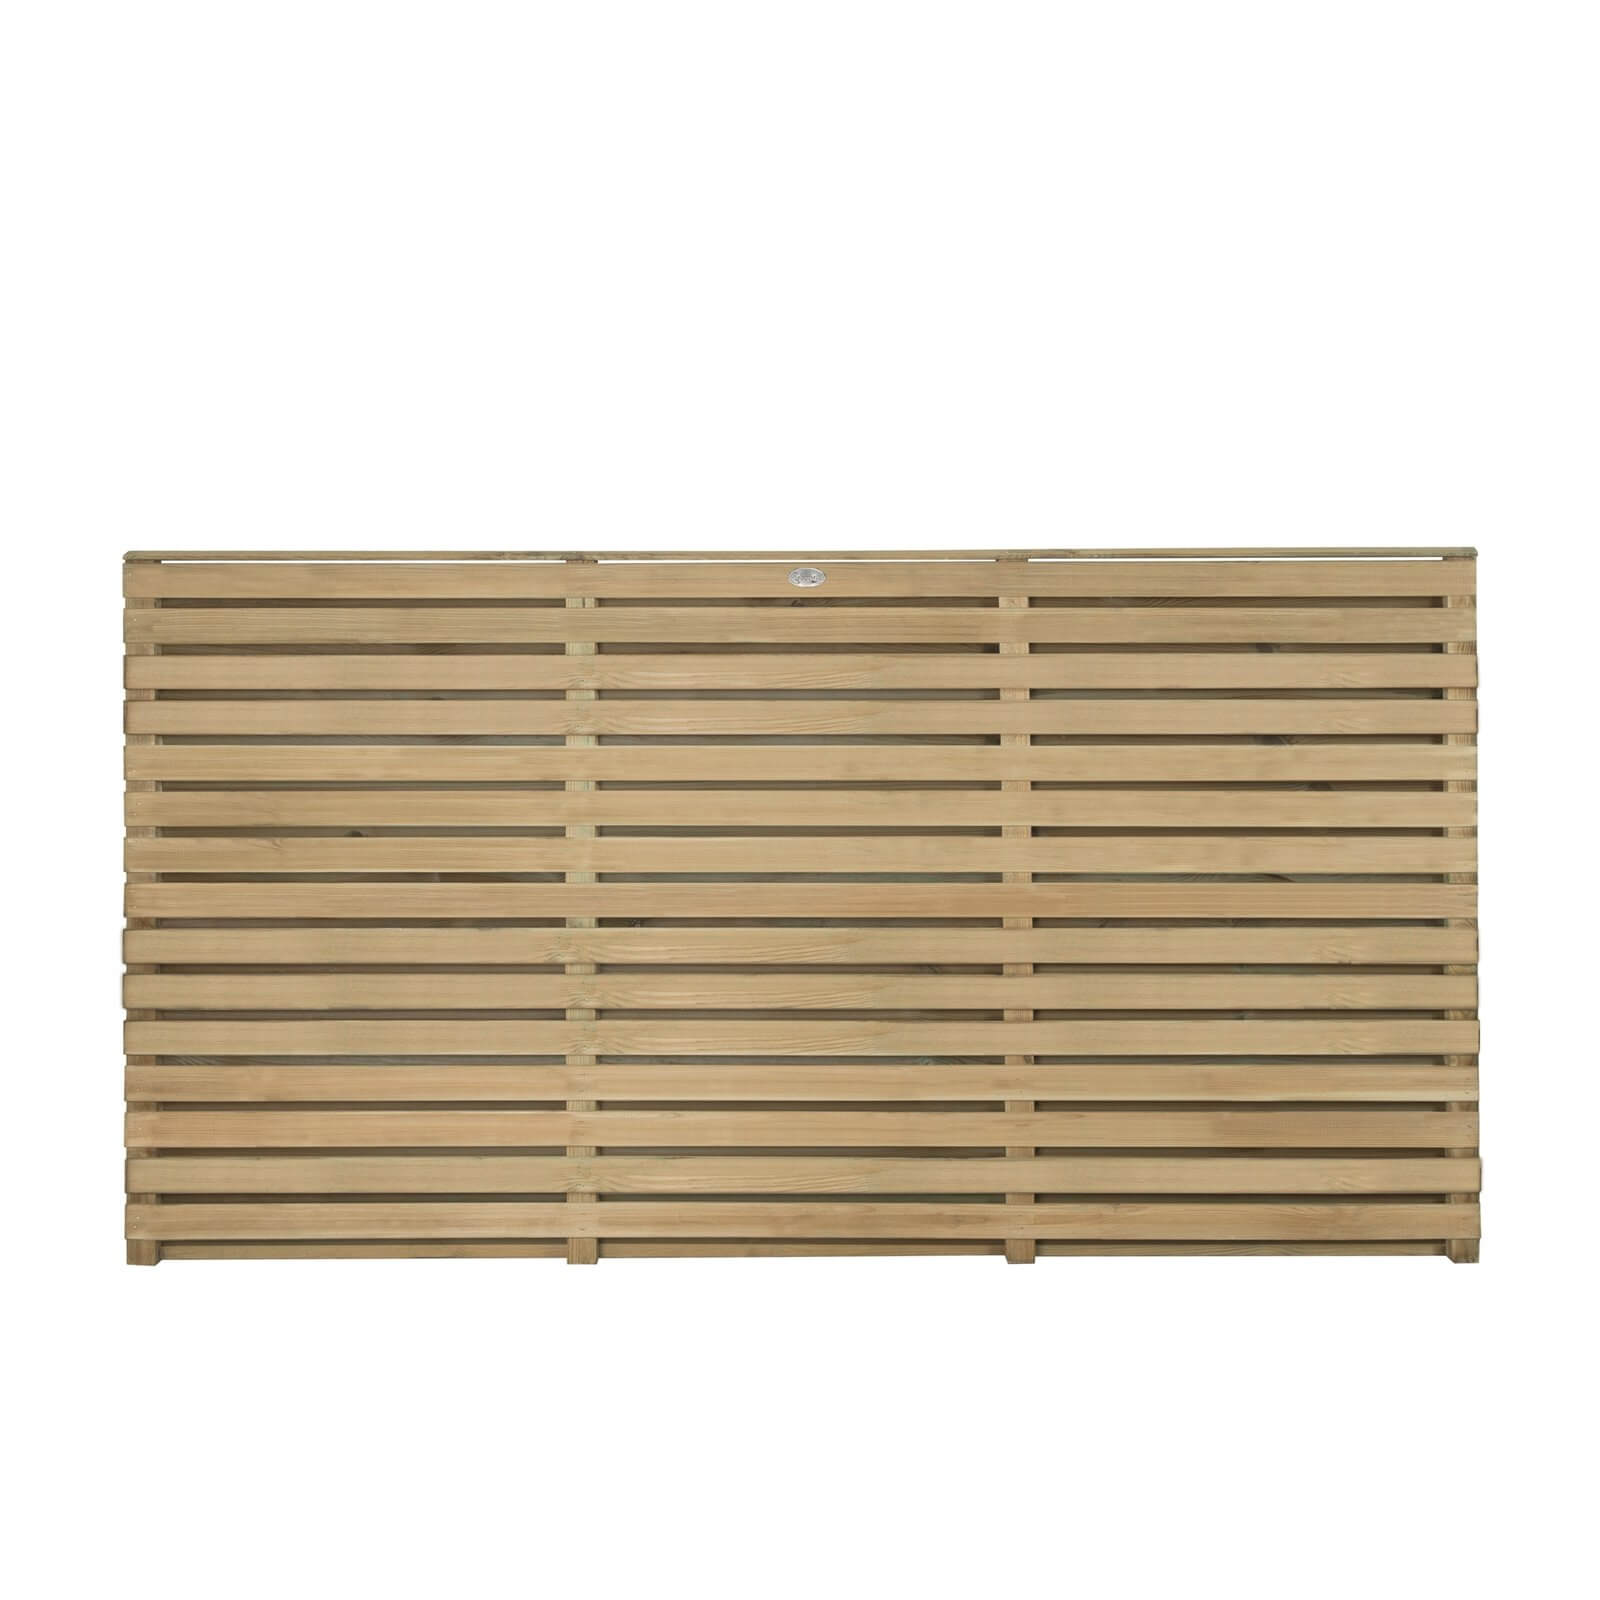 Forest Double Forest Slatted Fence Panel - 3ft - Pack of 4